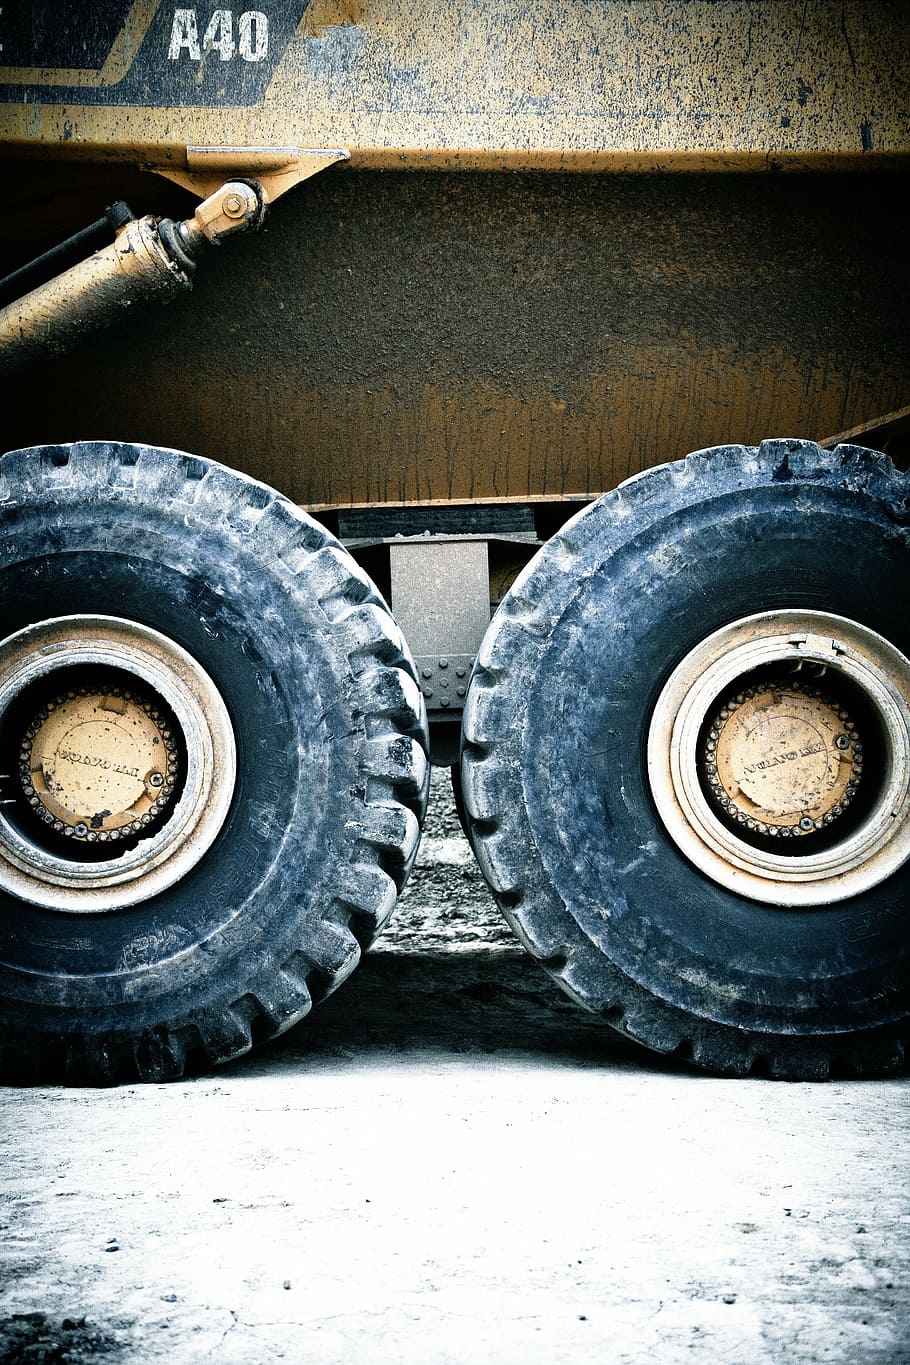 close-up photo, a40, 40 haul truck, monster truck, mine, removal, wheel loader, dump truck, large, enormous